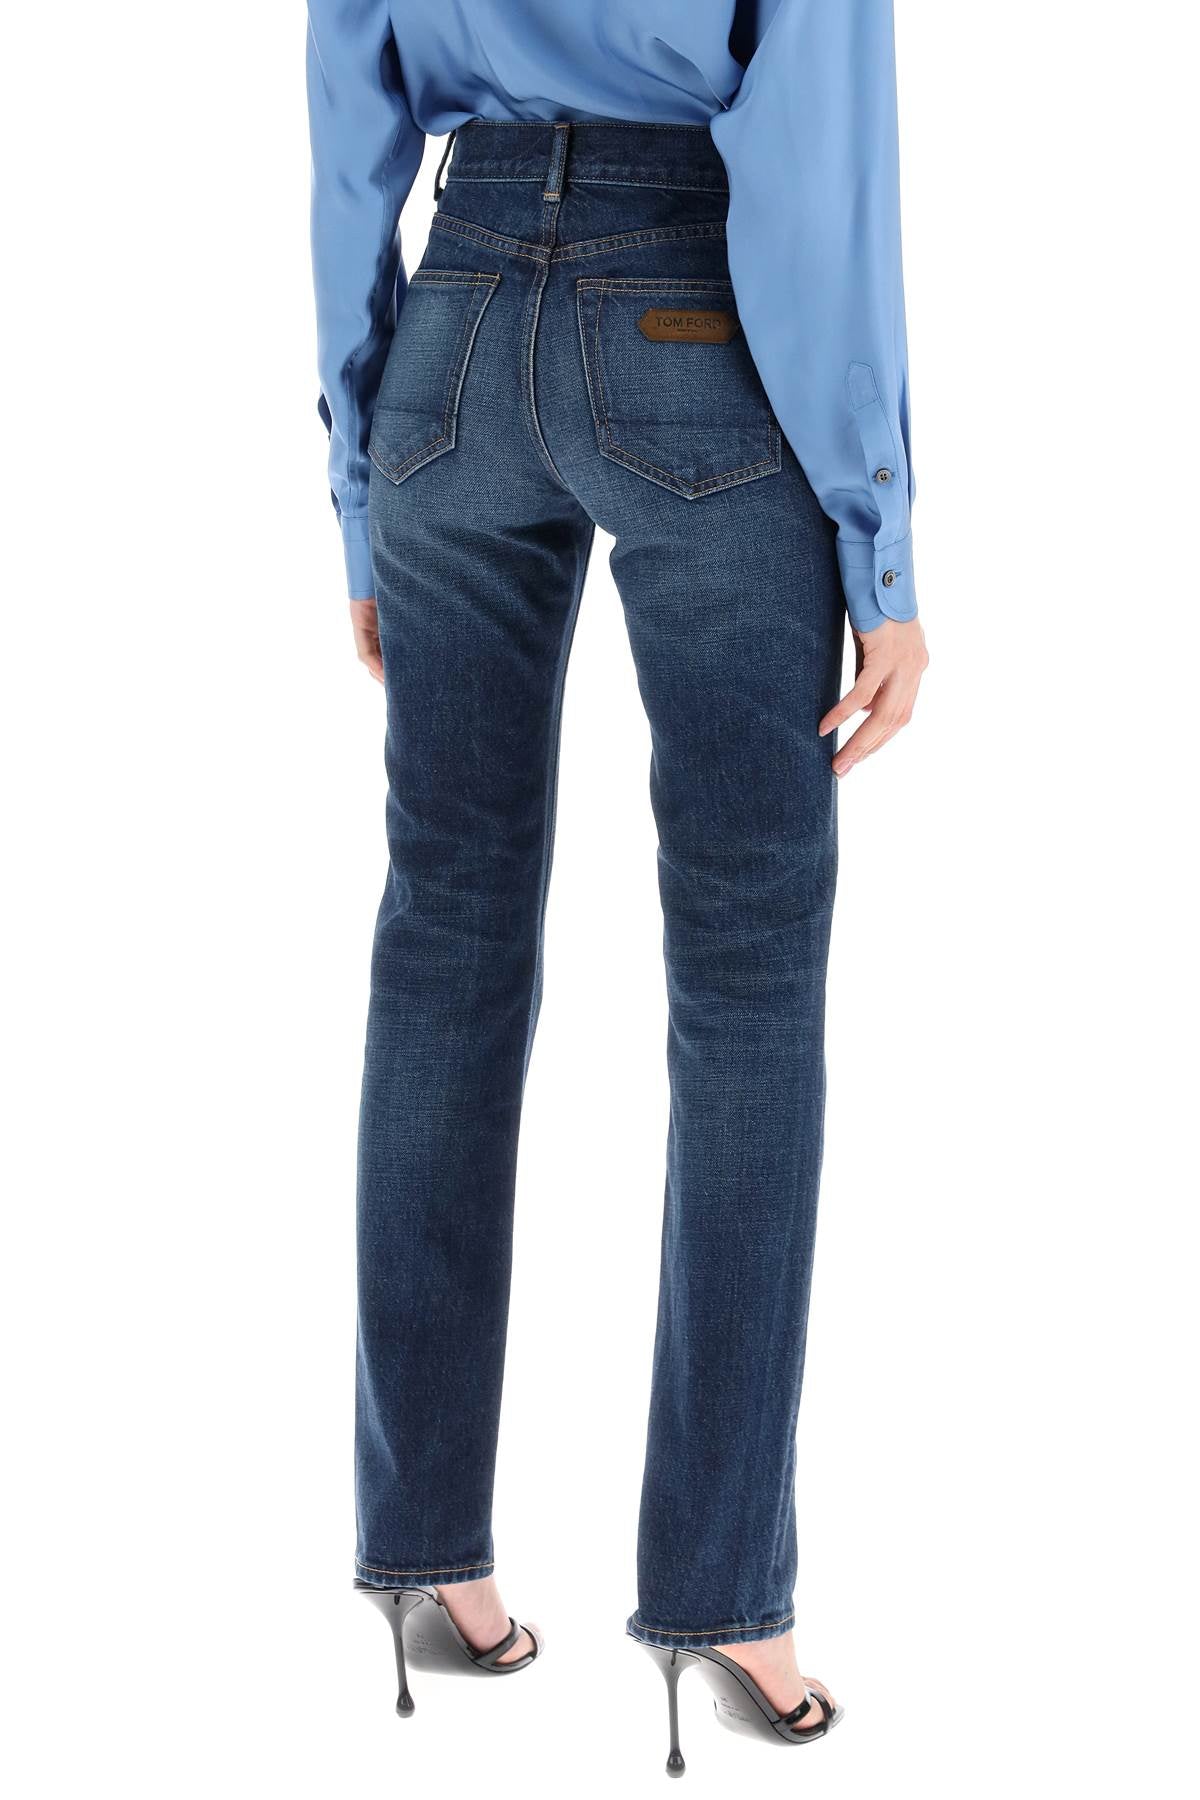 Tom ford "jeans with stone wash treatment-2